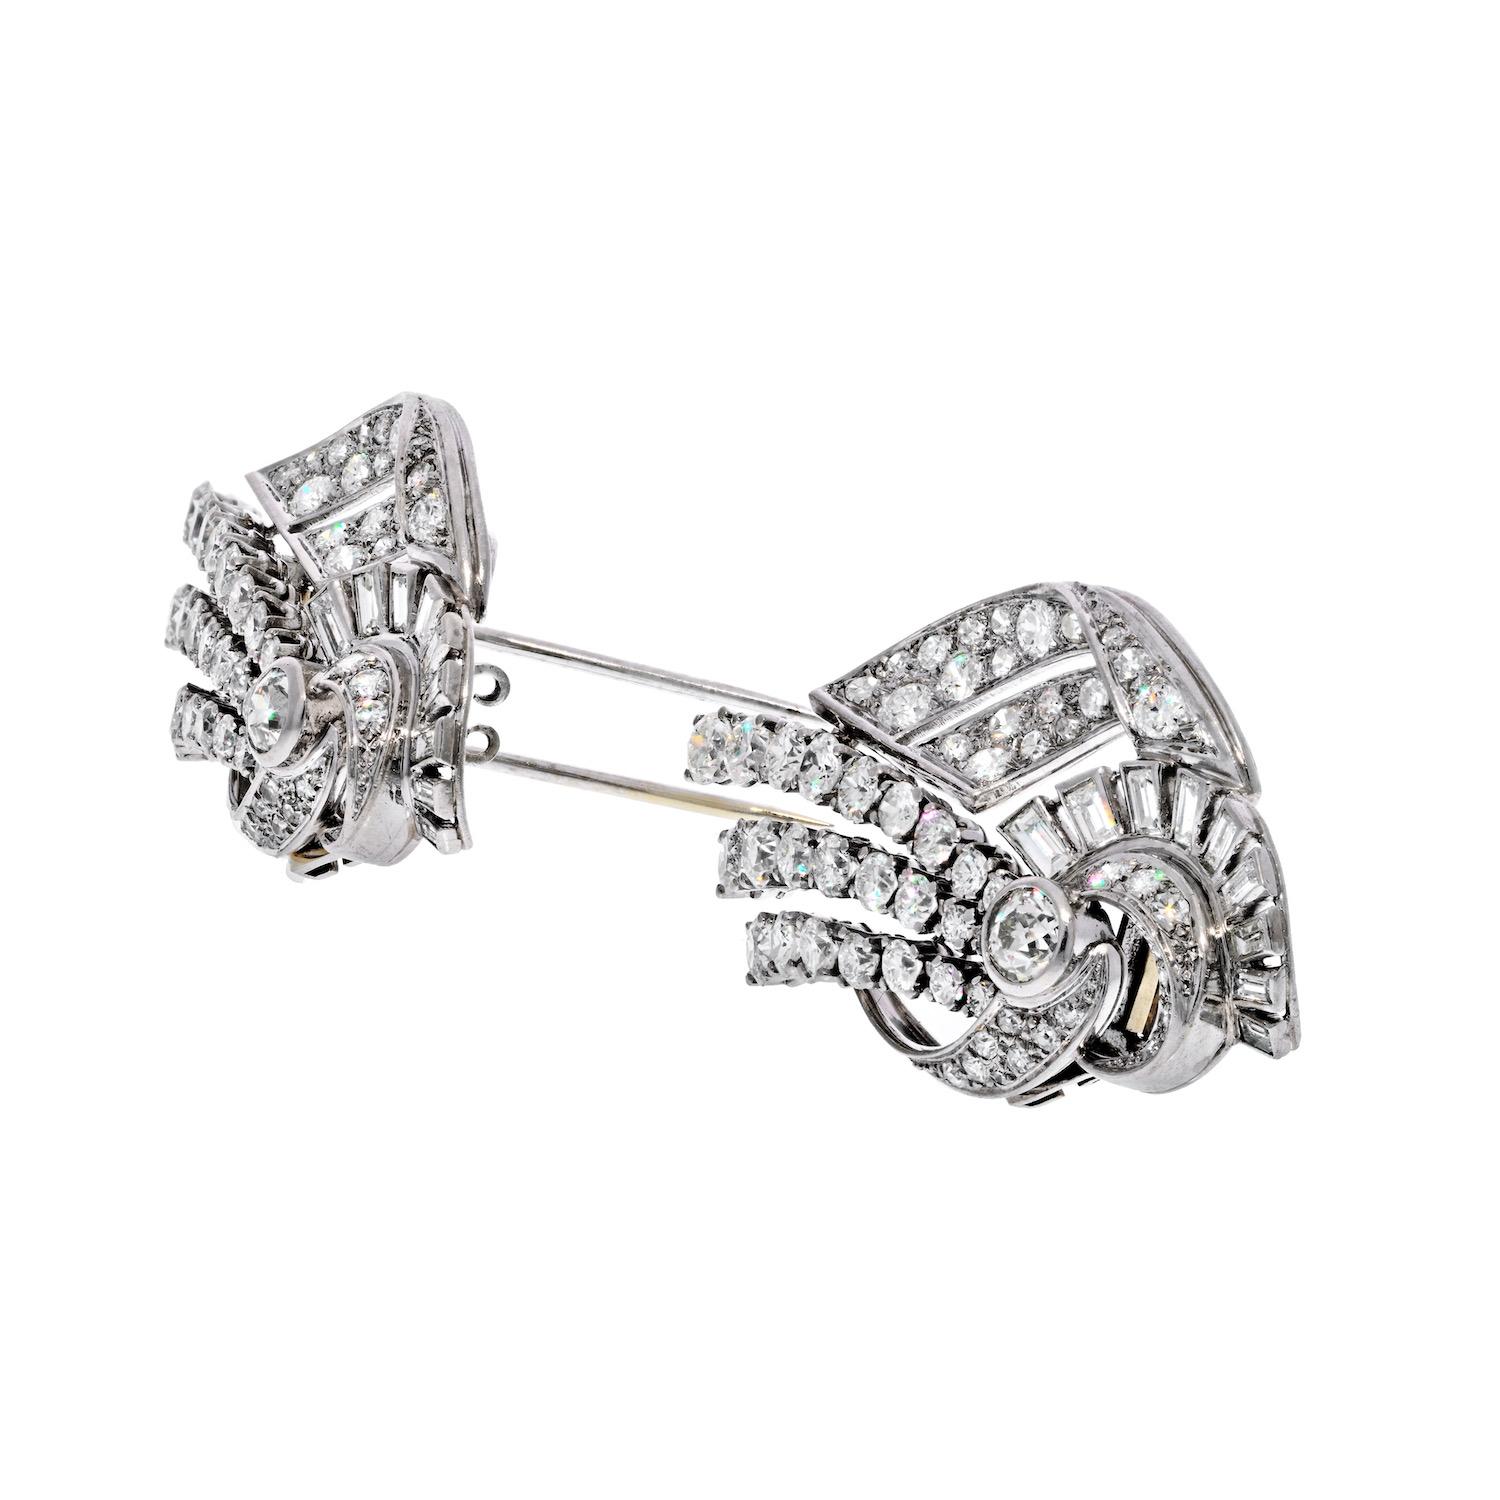 Spectacular diamond brooches that create a wonderful double clip. First created by the fine-jewelry maker Cartier in 1927, a double clip brooch was a pin-backed mount for two dress clips, so they could be worn together as one brooch or as two